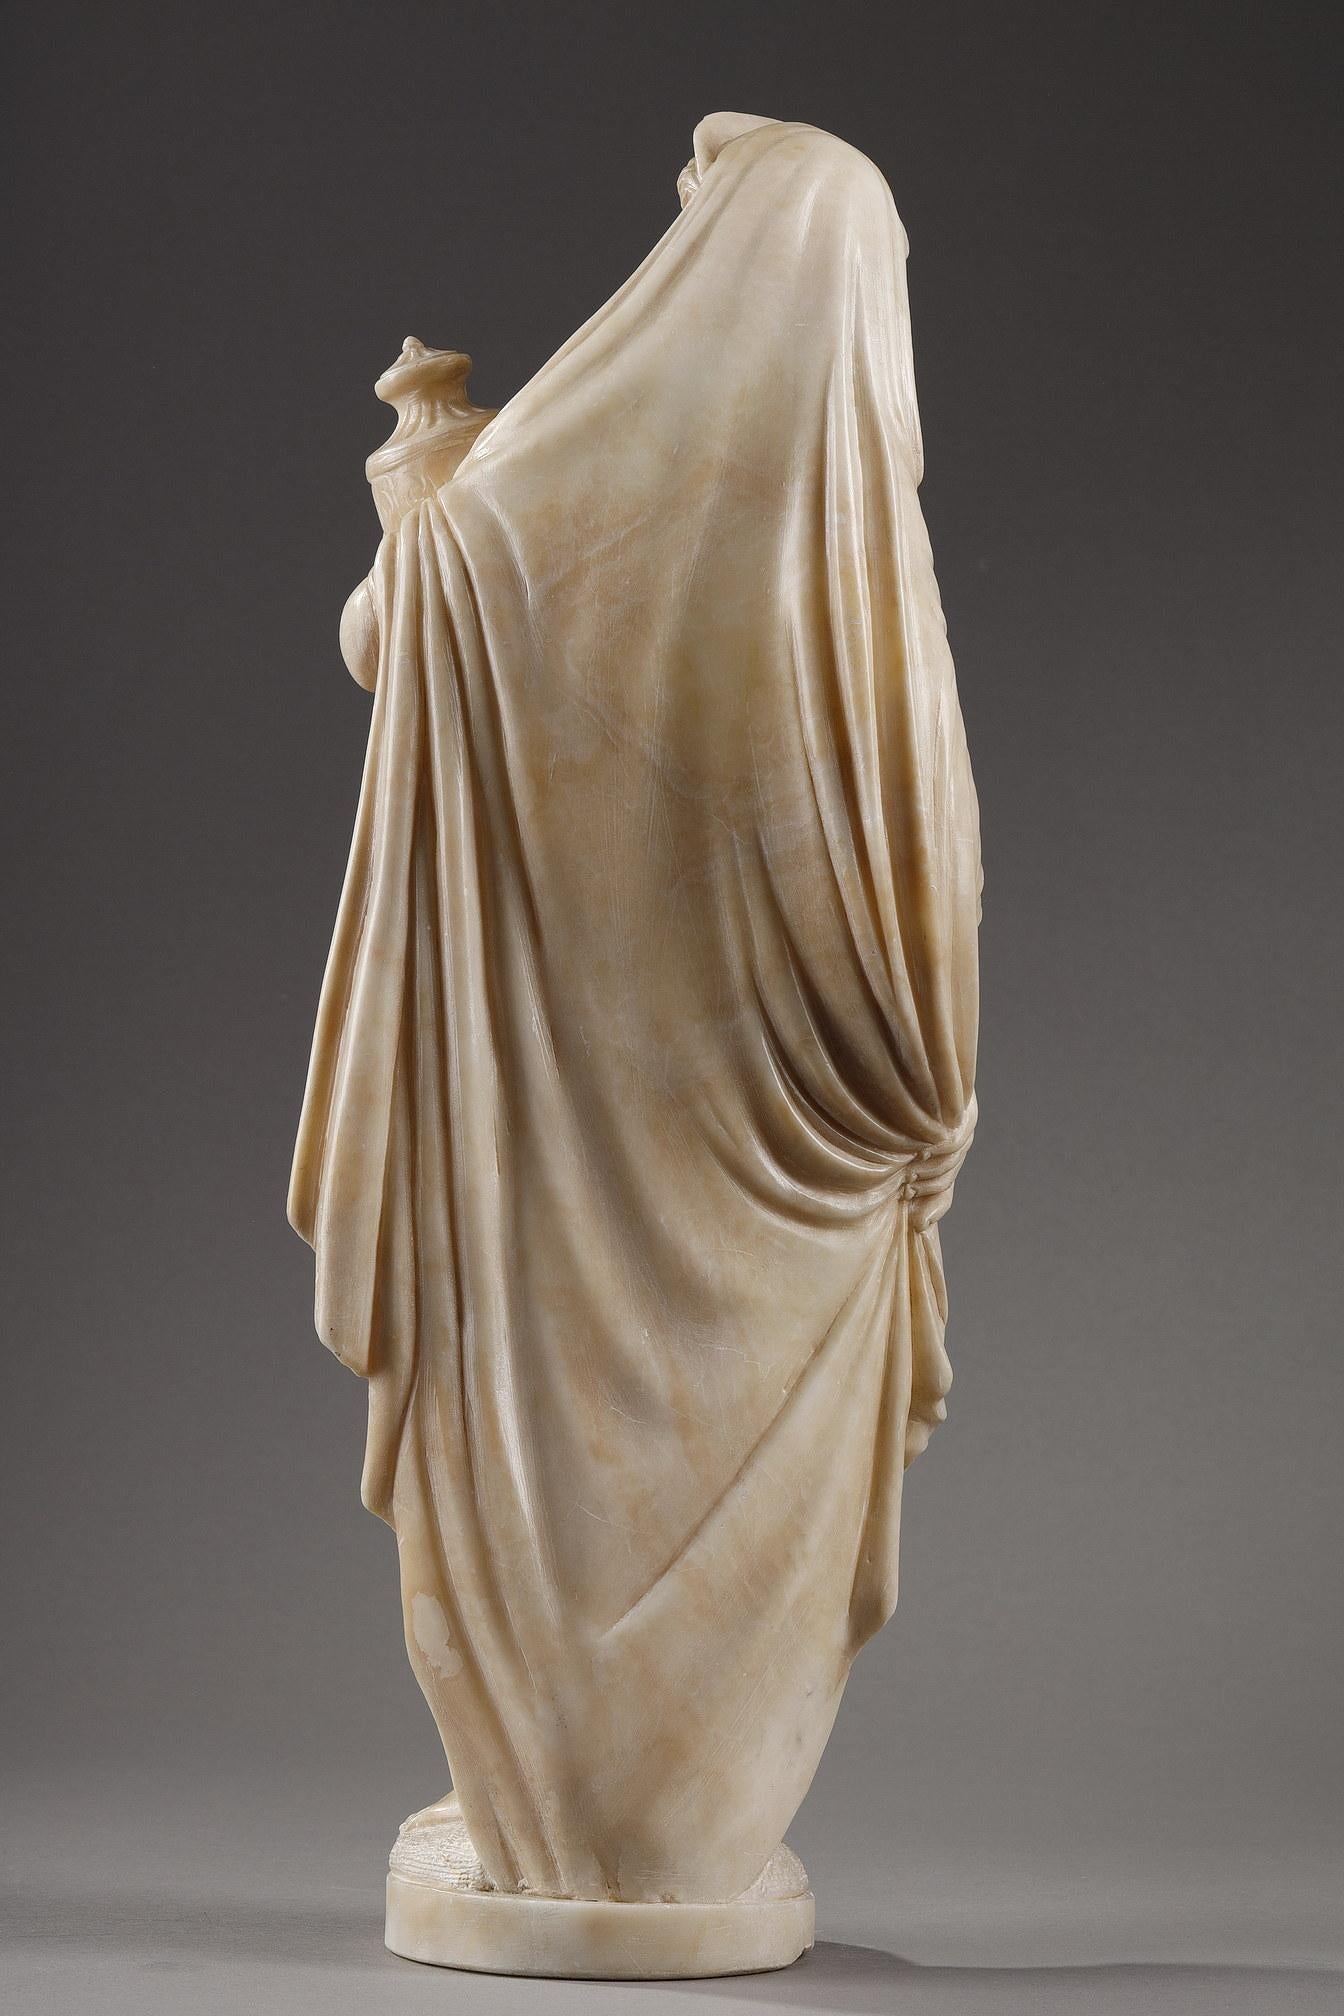 Delicate alabaster statuette representing Pandora, after James Pradier. She is draped in a long veil starting from her tiara which hides half of her body leaving one of her breasts visible . The fine sculptural work gives a great plasticity to the